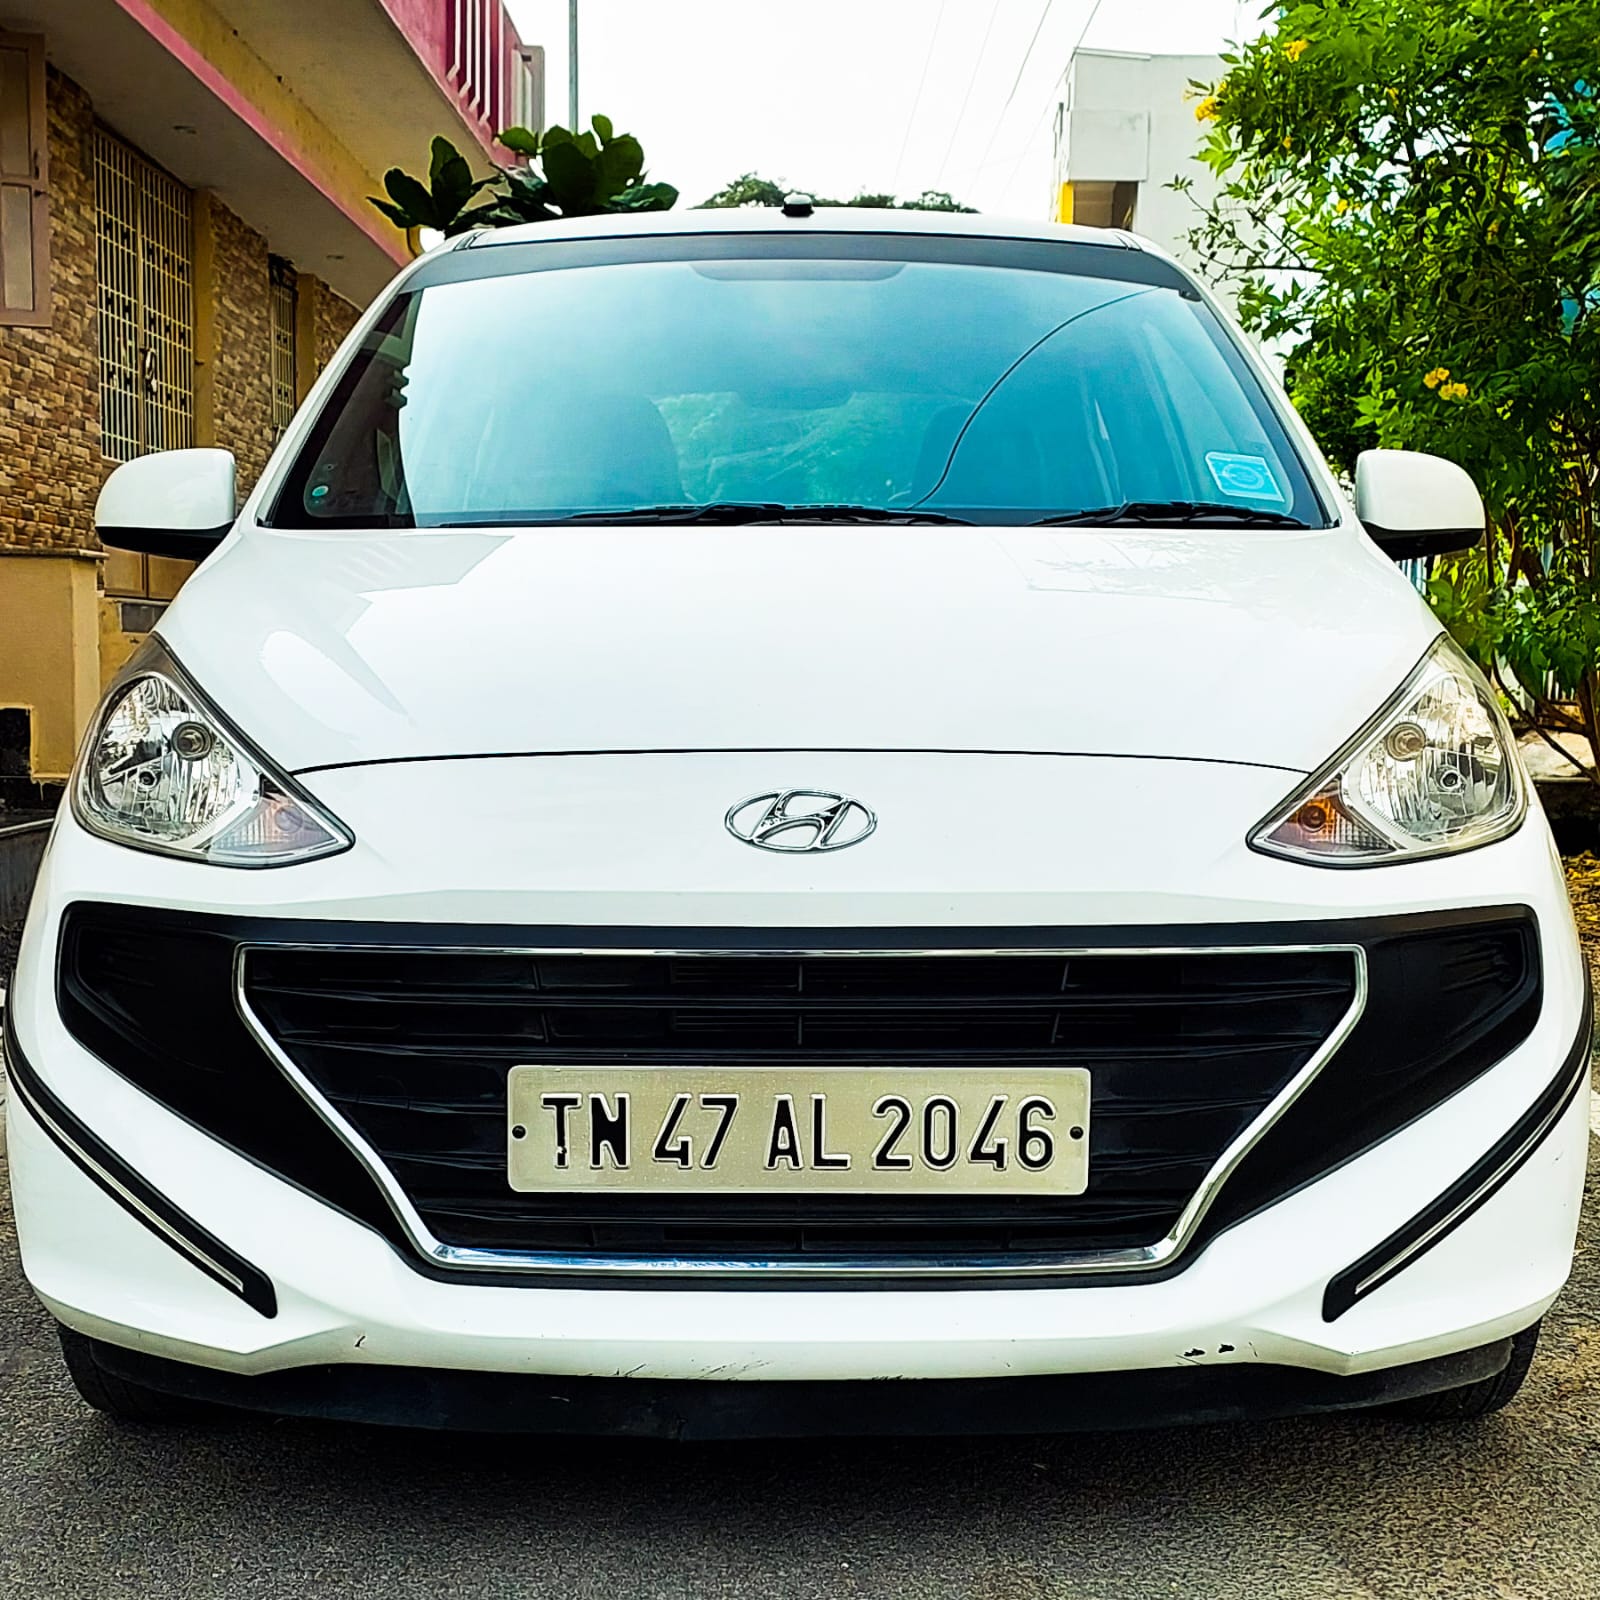 6511-for-sale-Hyundai-Santro-Petrol-First-Owner-2018-TN-registered-rs-435000